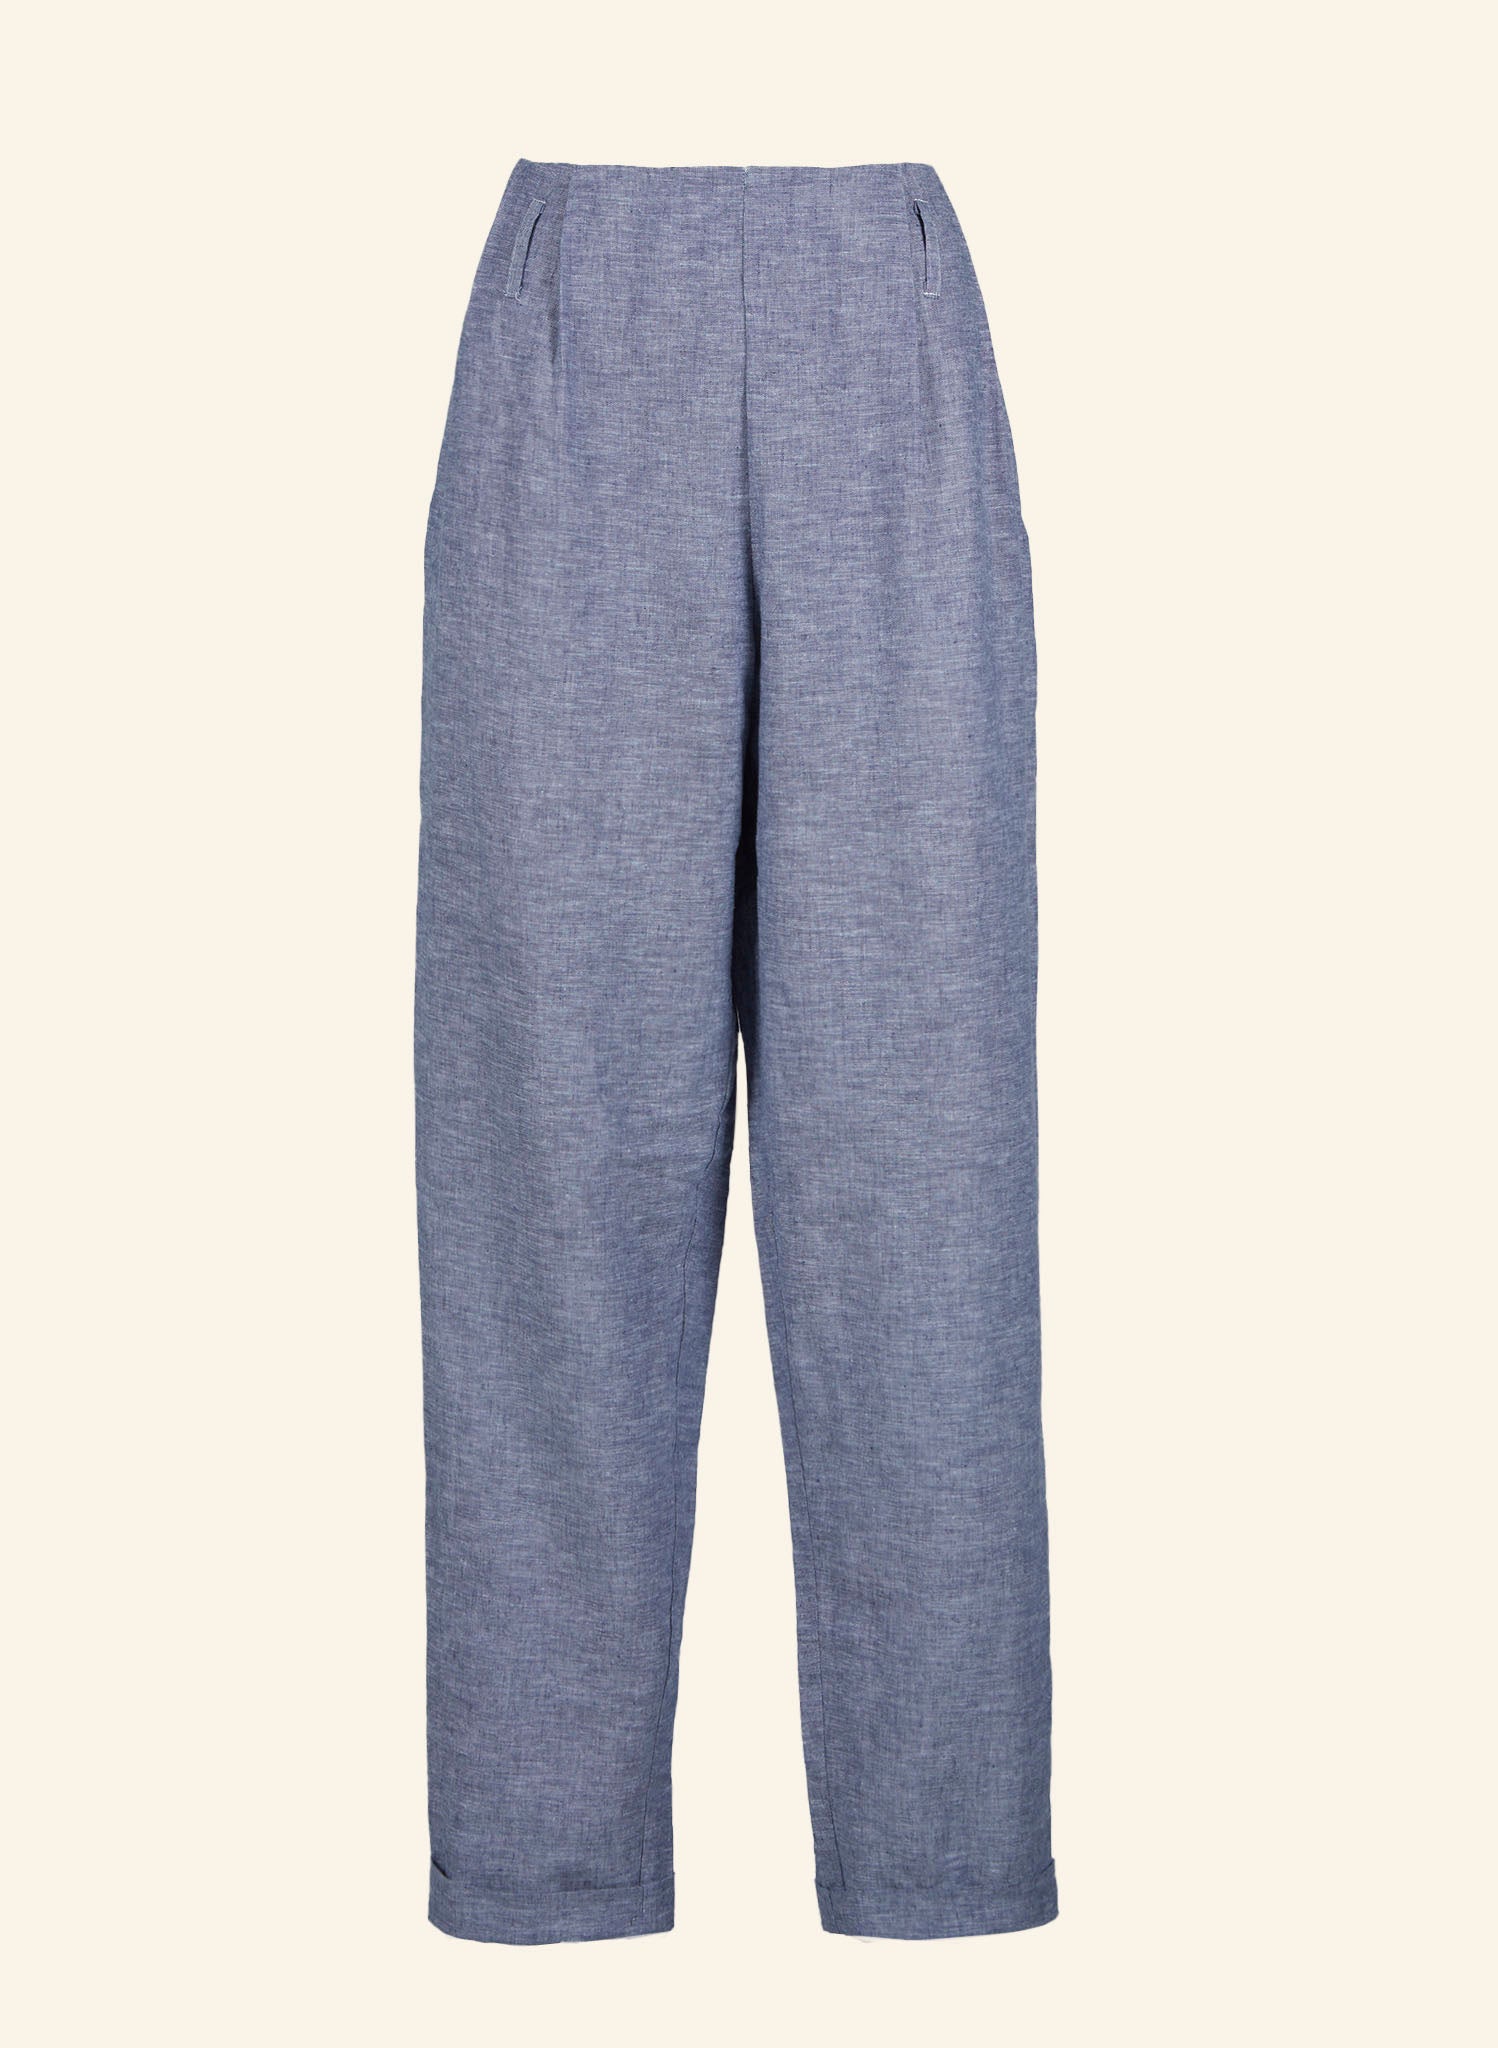 Wilma - Blue Marl Trousers